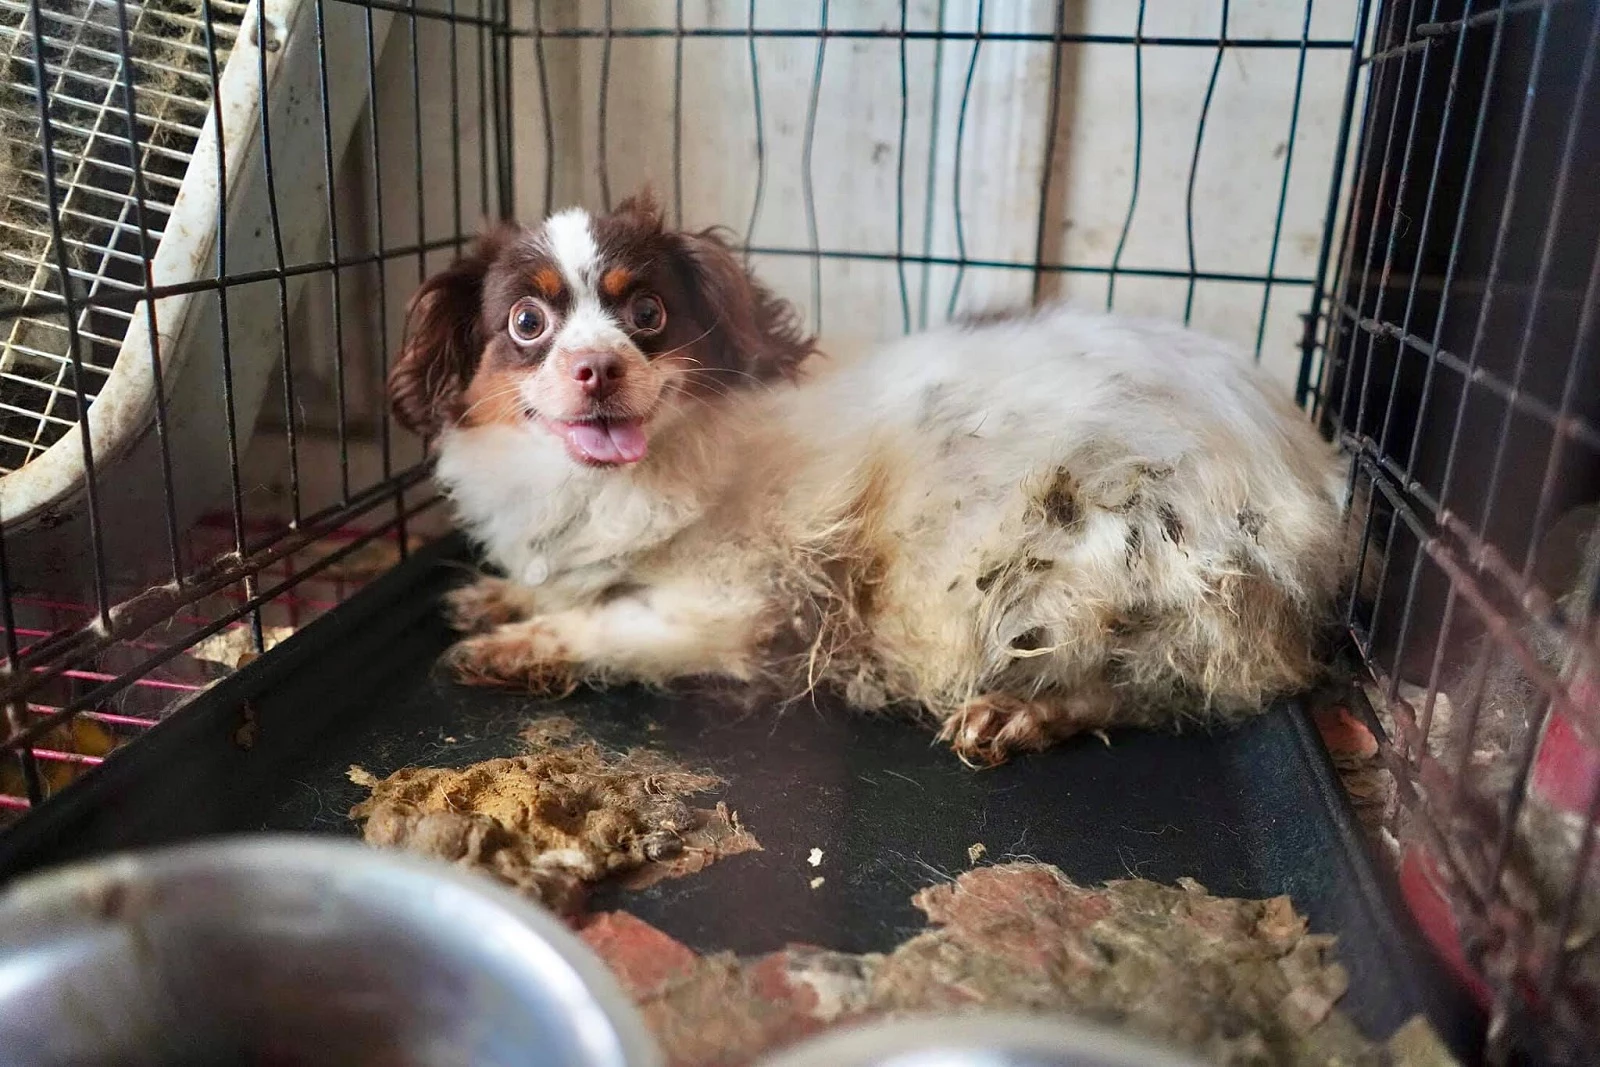 60 dogs removed from filthy Monmouth 